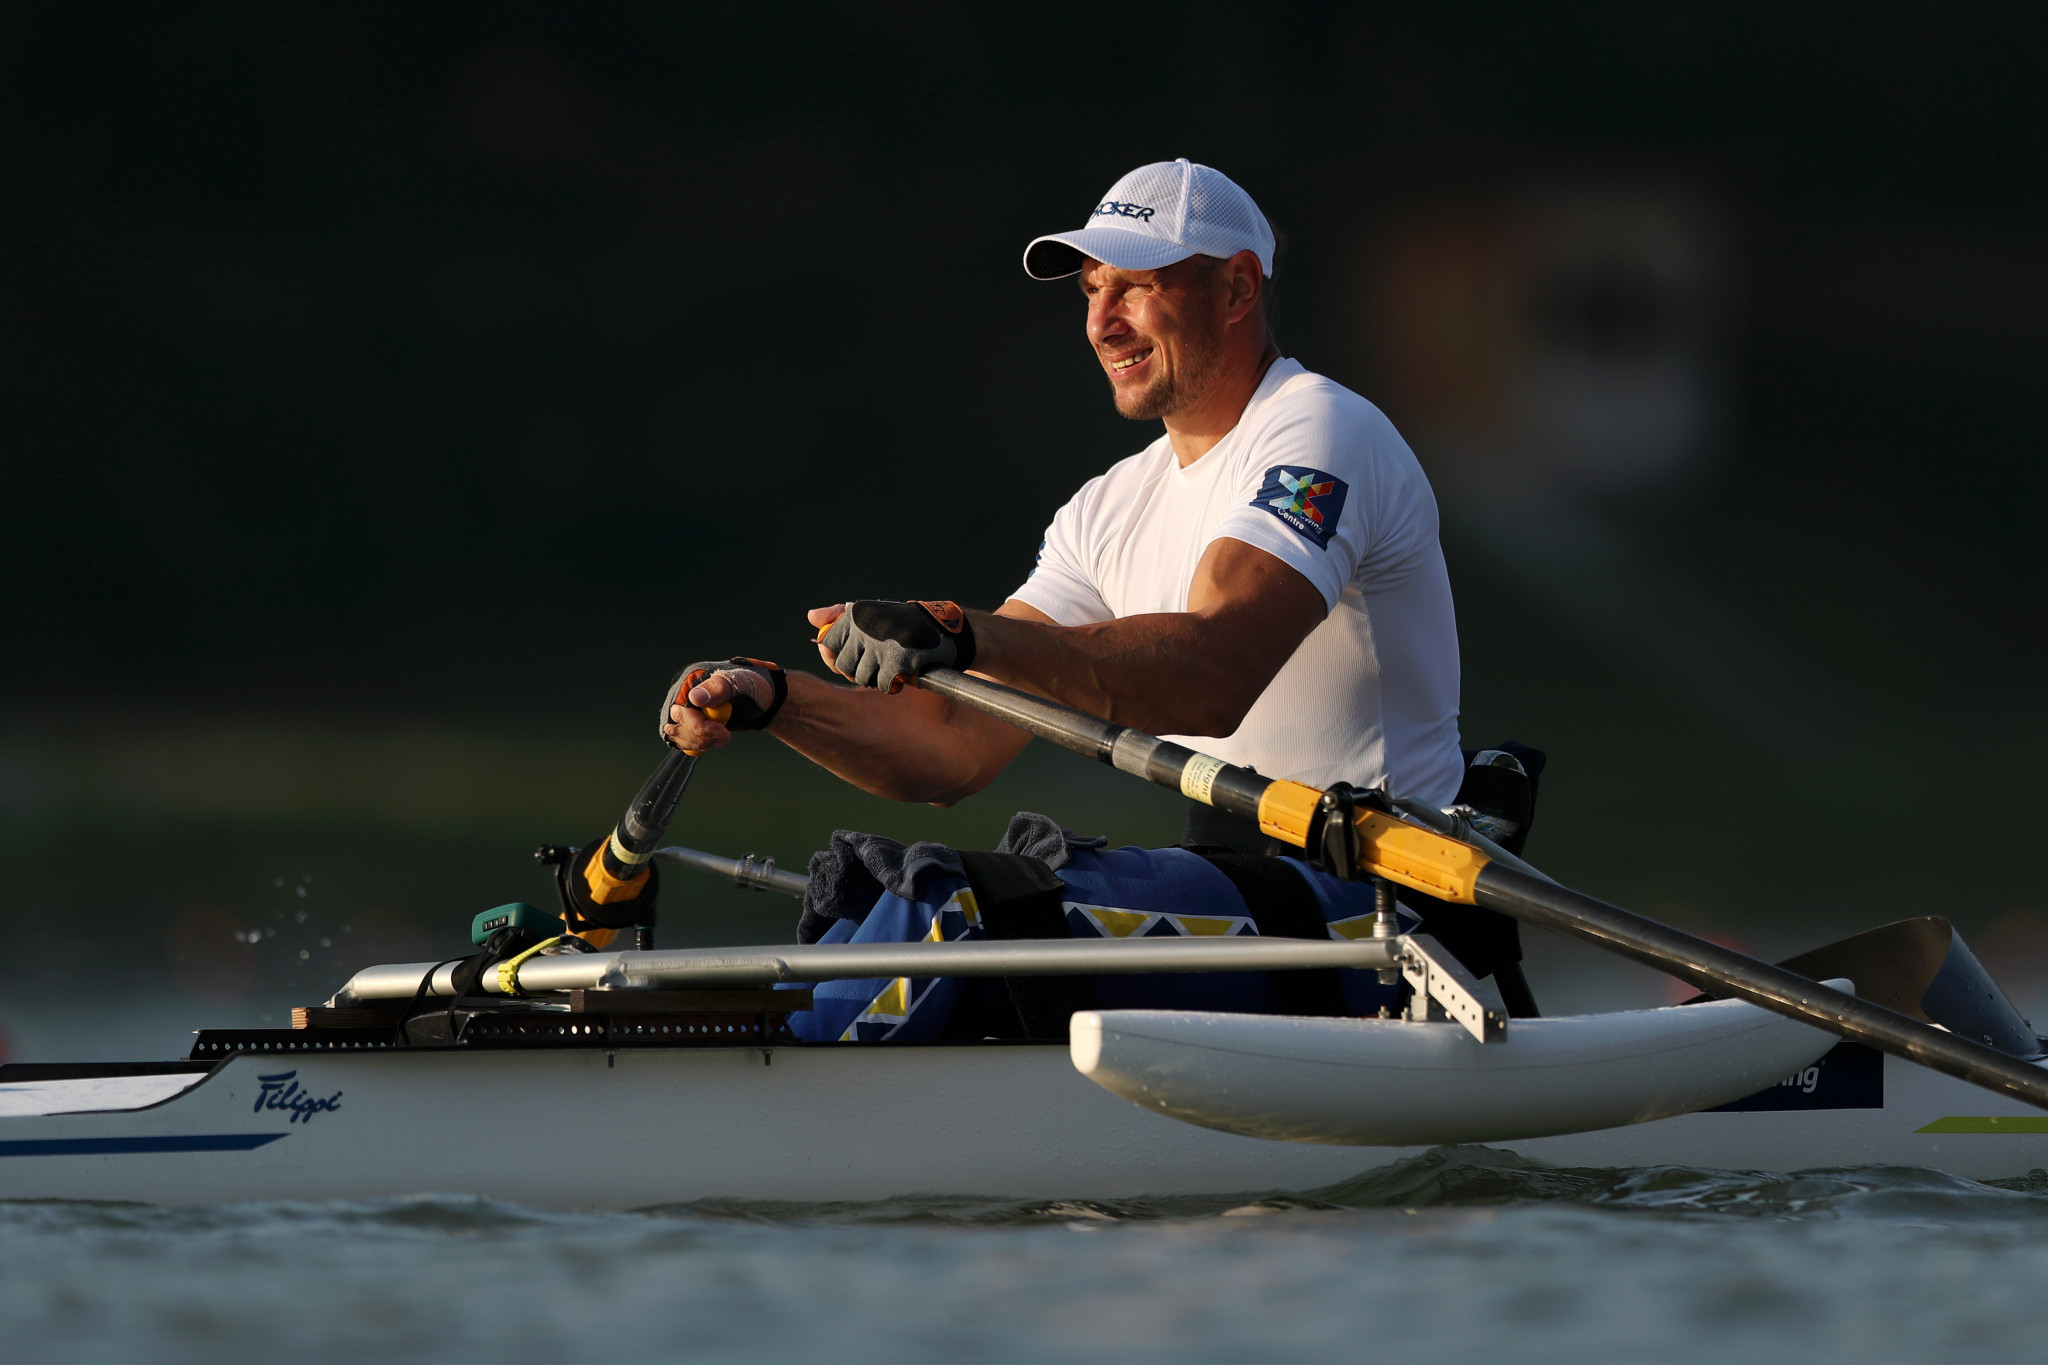 Roman Polianskyi was one of the rowers to take part in the two-day test event ©Getty Images